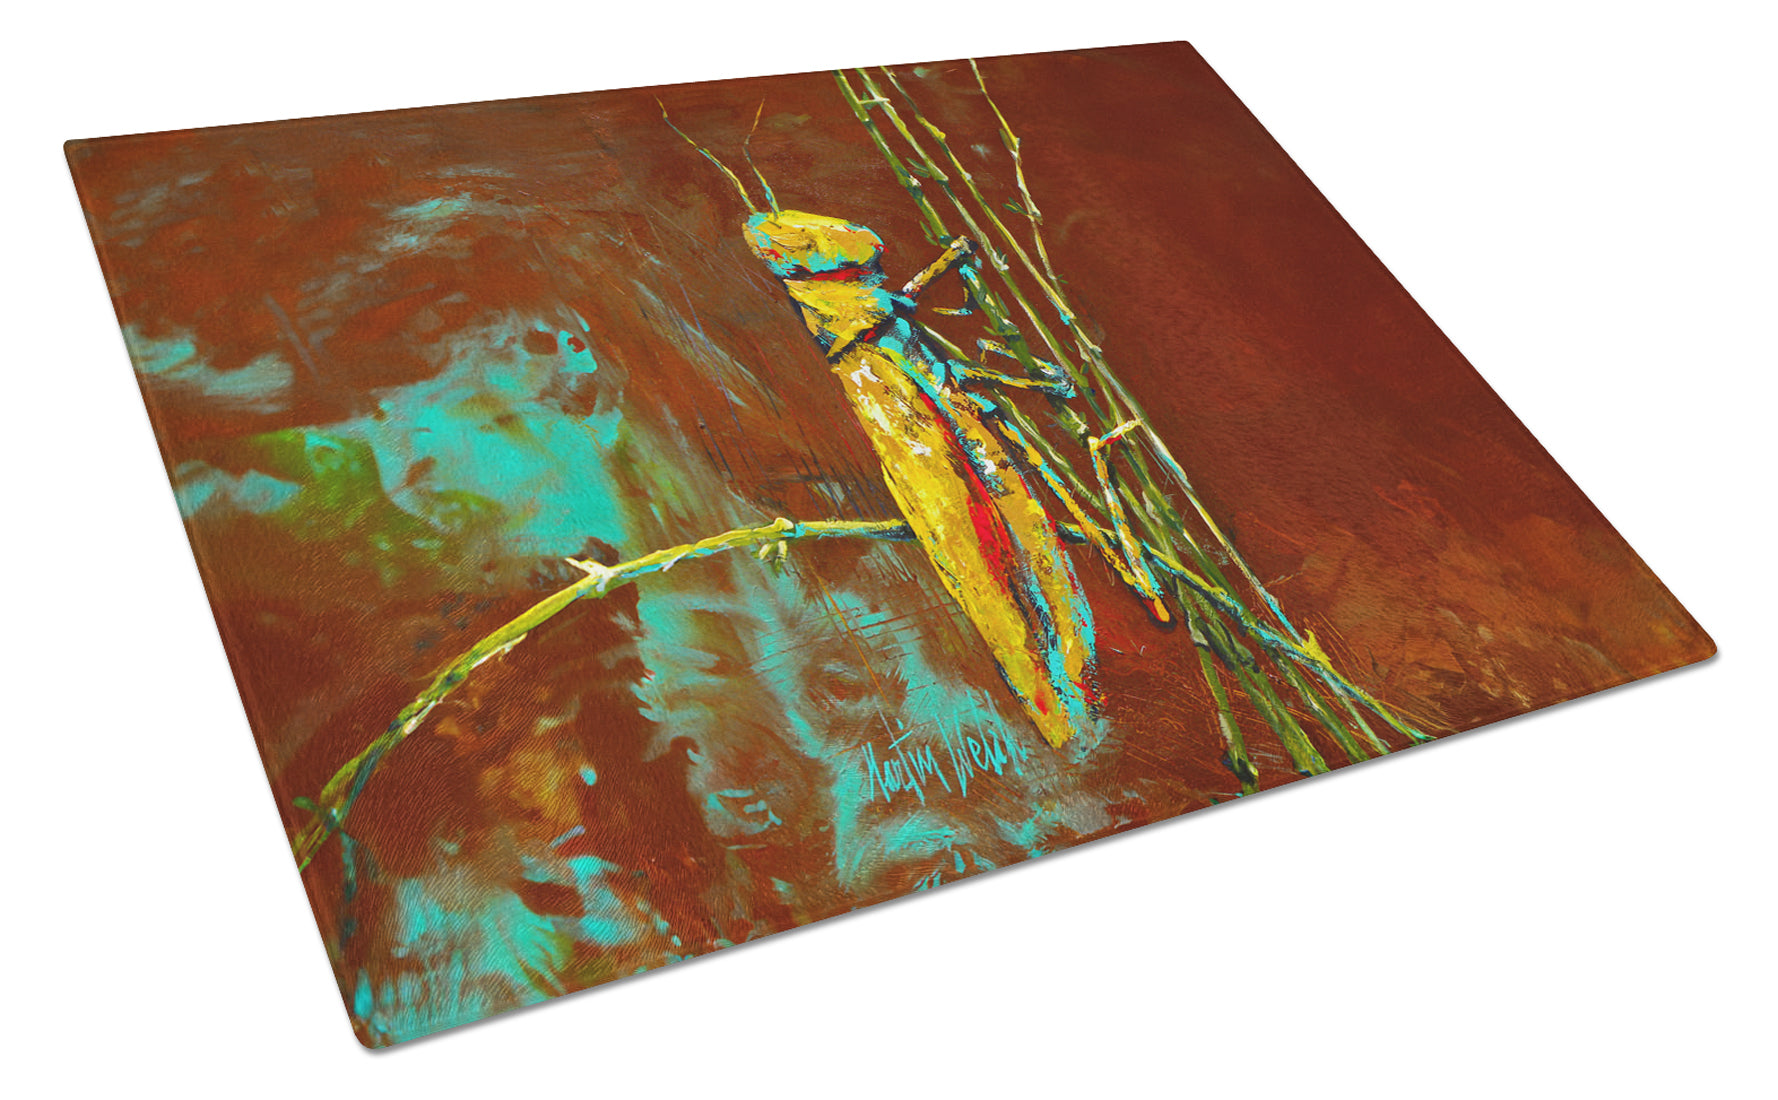 Buy this Stuck on Boo Grasshopper Glass Cutting Board